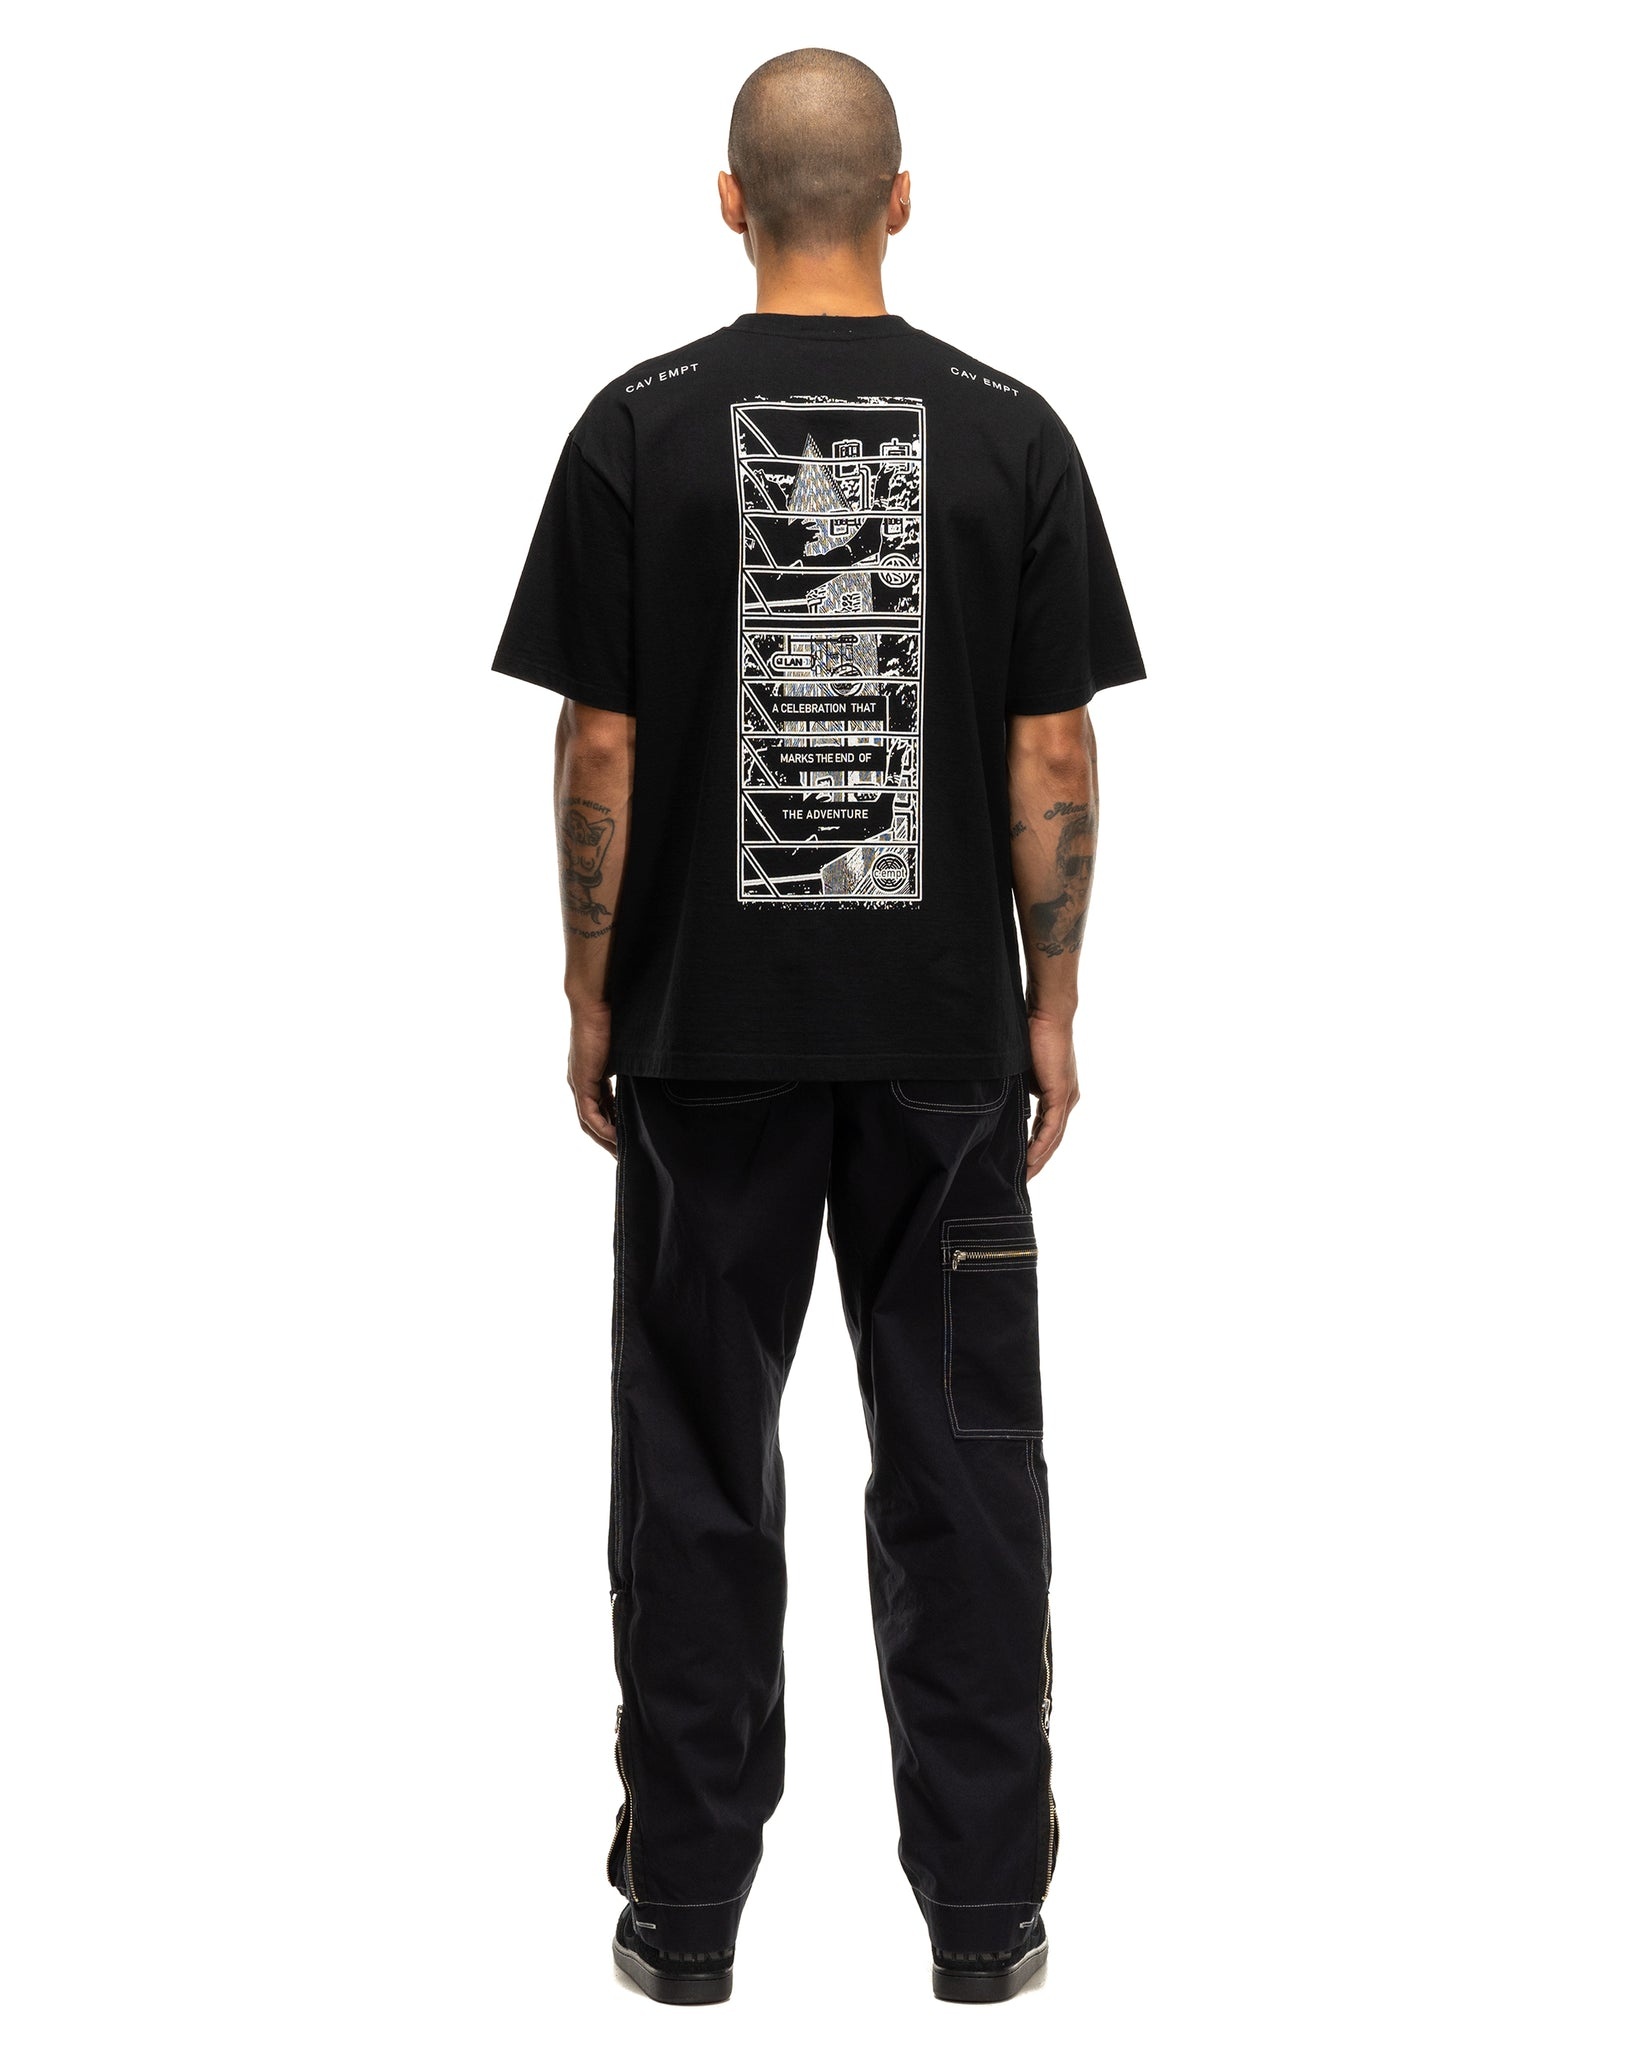 MARKS OF THE END T-SHIRT BLACK - 4